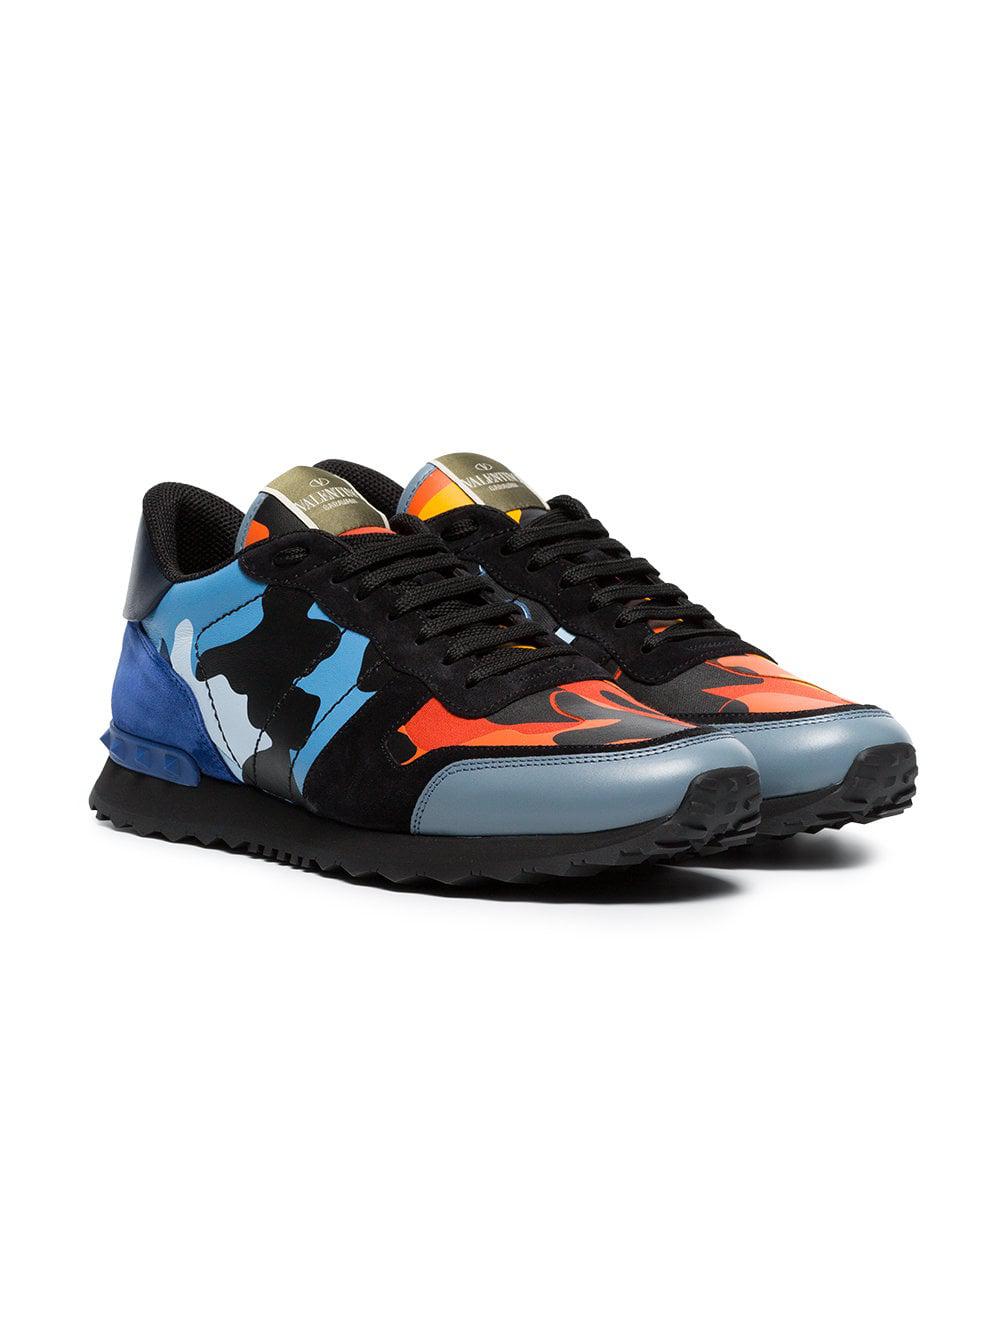 Valentino Blue And Orange Camouflage Rockrunner Leather Sneakers in Yellow for Men - Lyst